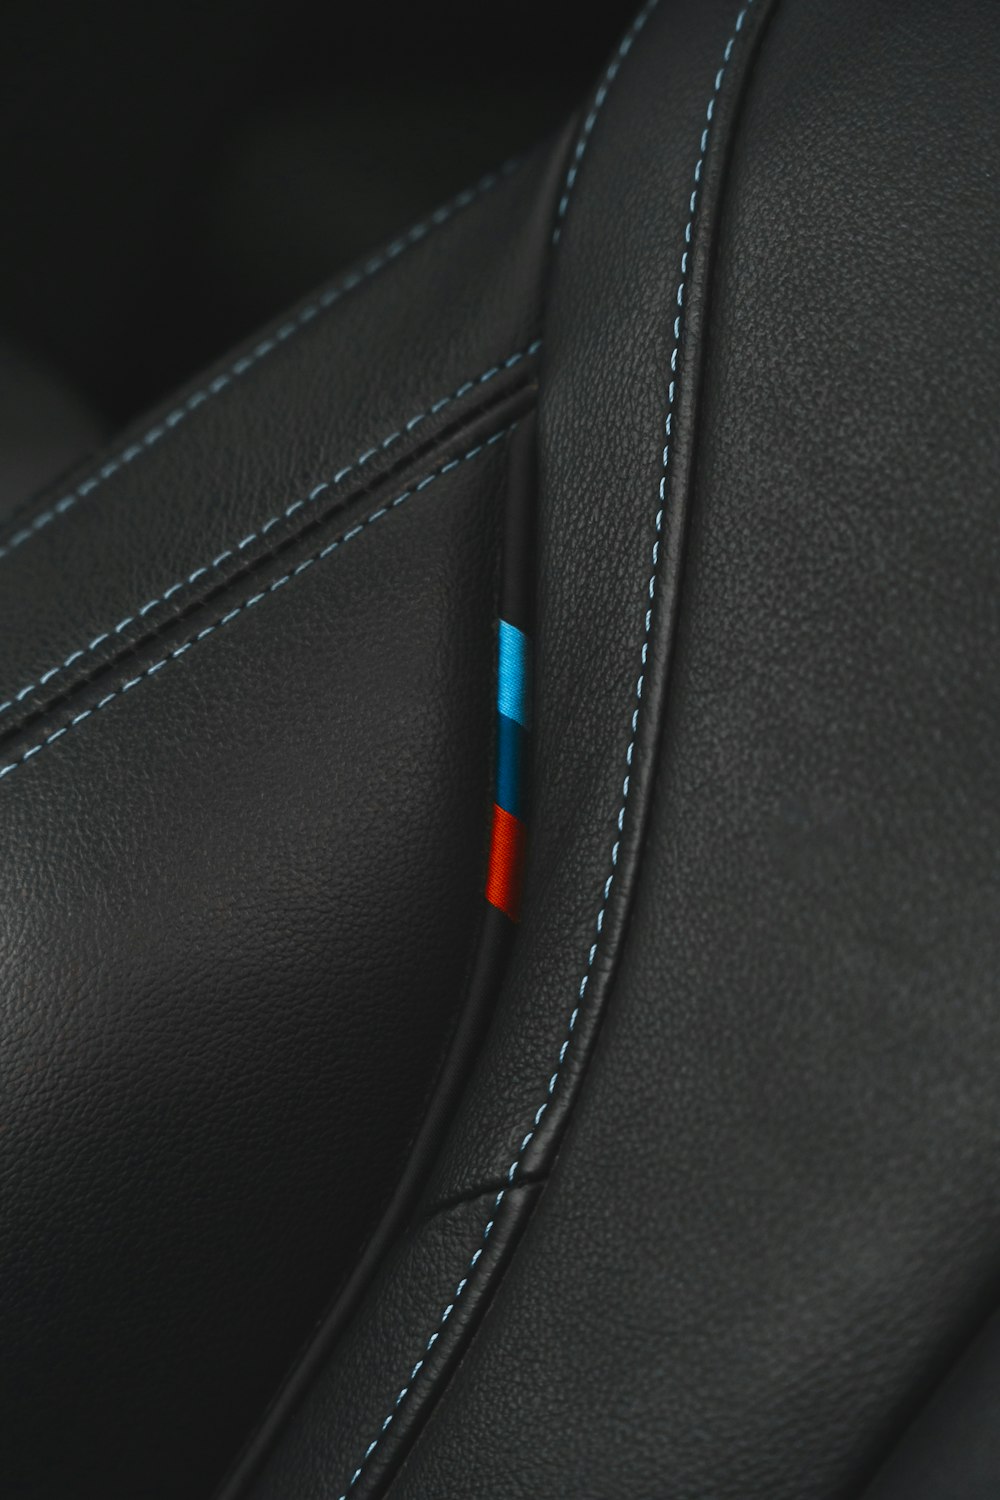 a close up of a black leather seat with a red and blue stitch